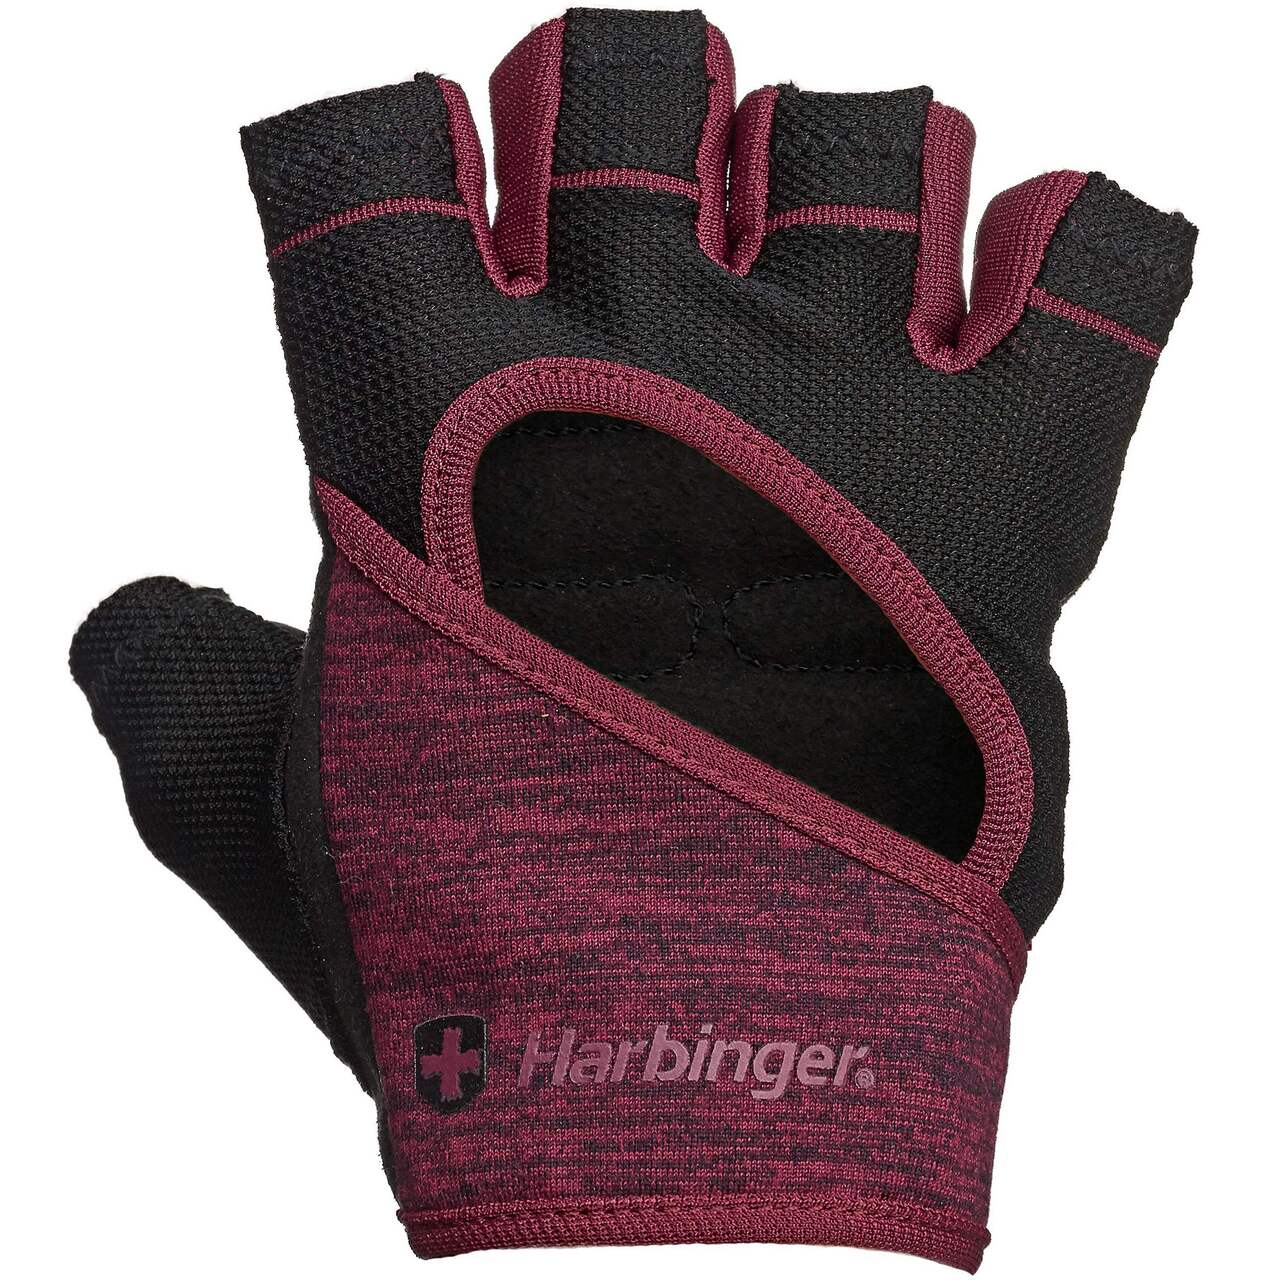 https://media-www.canadiantire.ca/product/playing/exercise/exercise-accessories/1840704/harbinger-women-s-flexfit-glove-merlot-small-27ae1b1e-6406-450b-87c5-bac215d409b0-jpgrendition.jpg?imdensity=1&imwidth=640&impolicy=mZoom